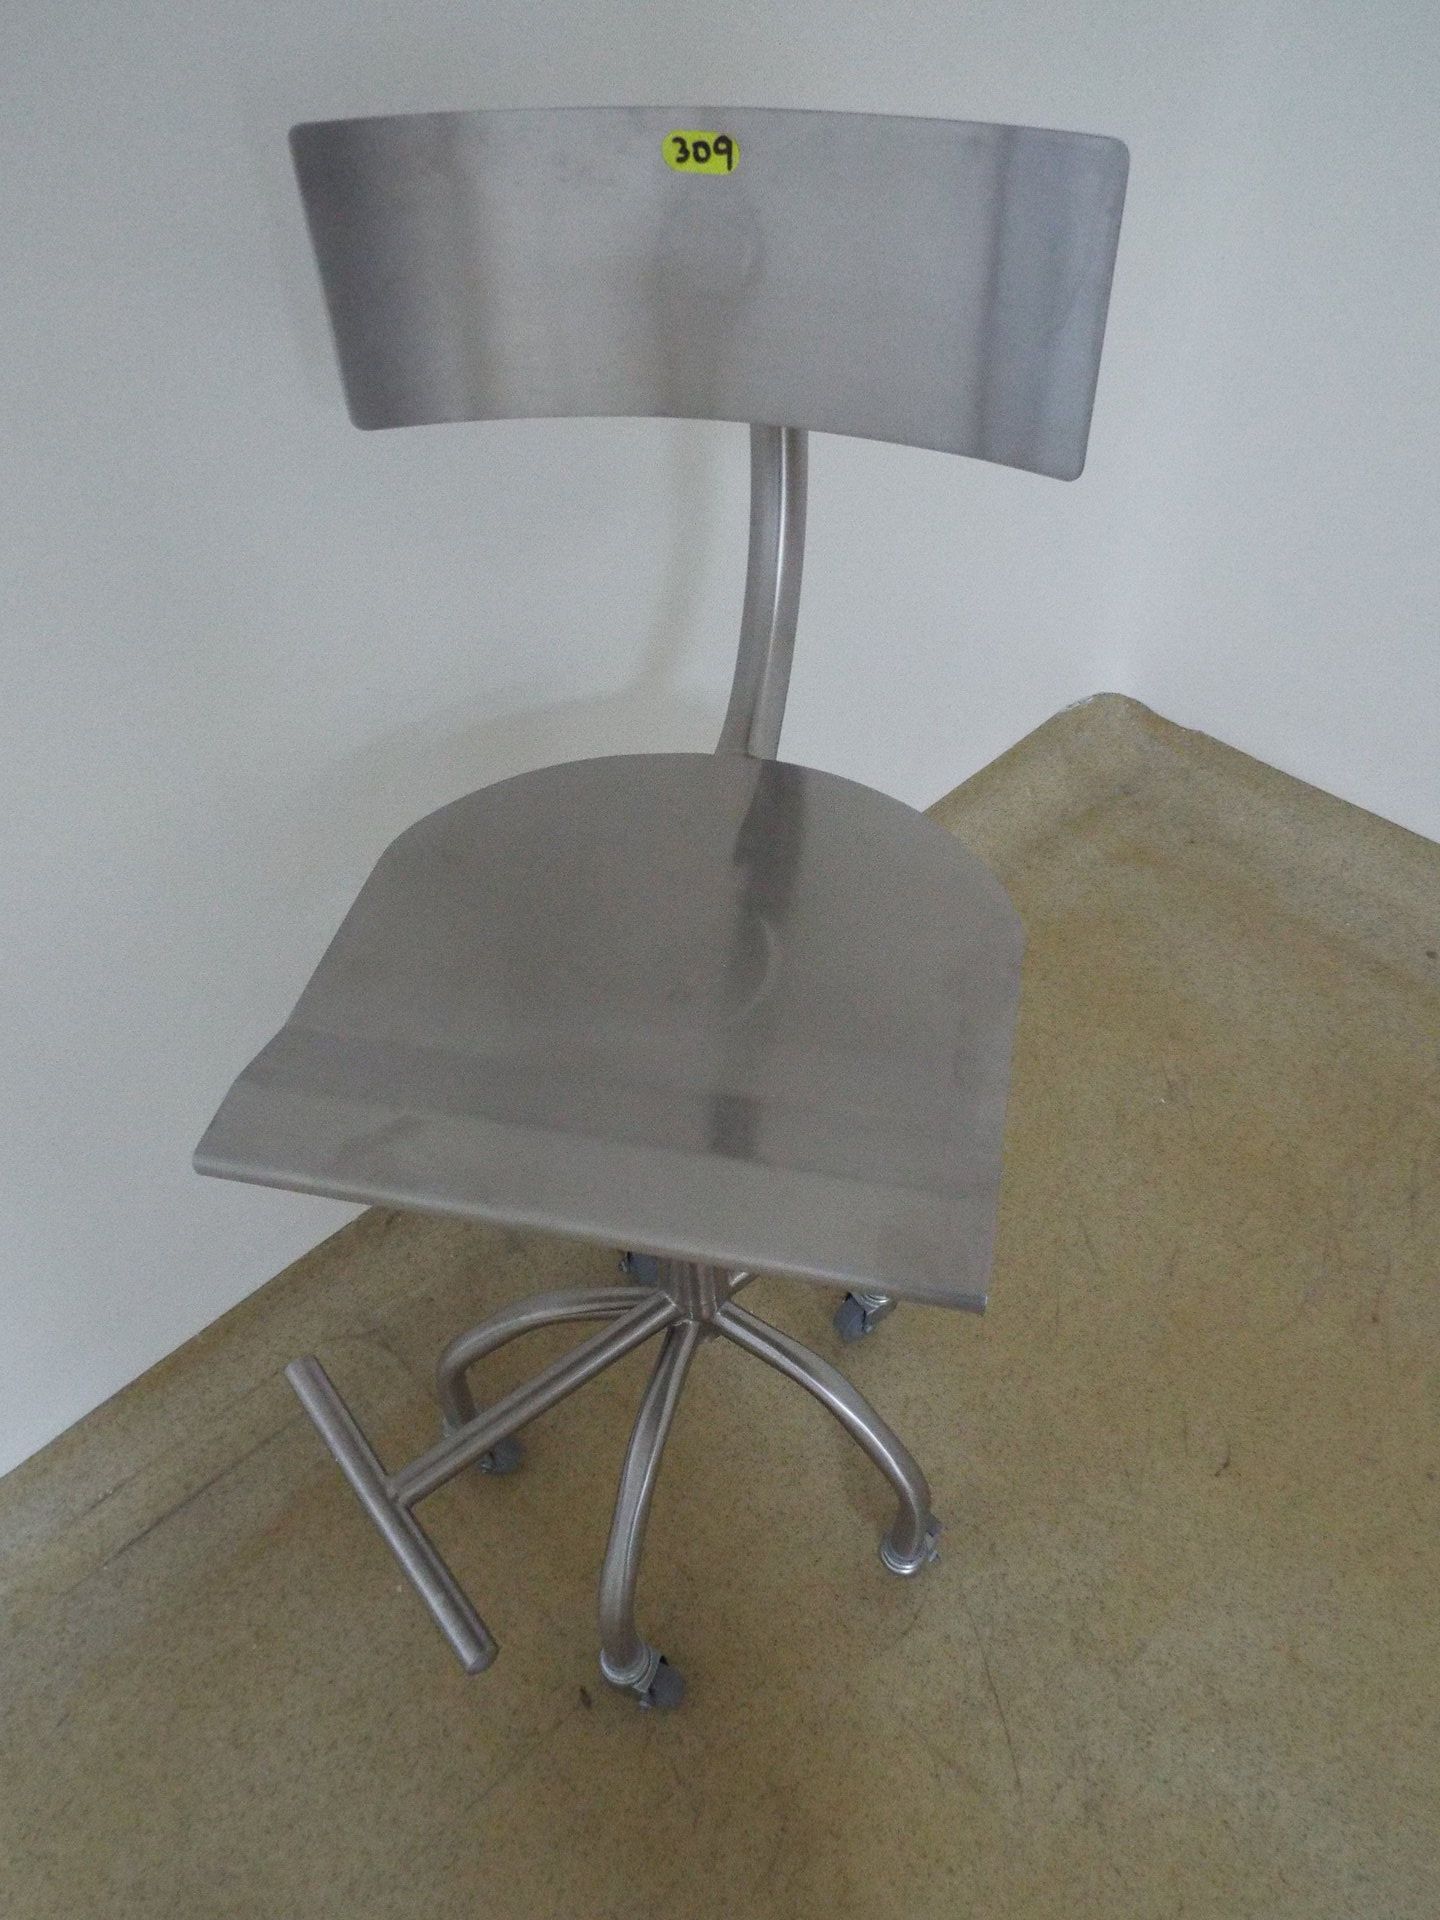 Stainless steel chair on casters